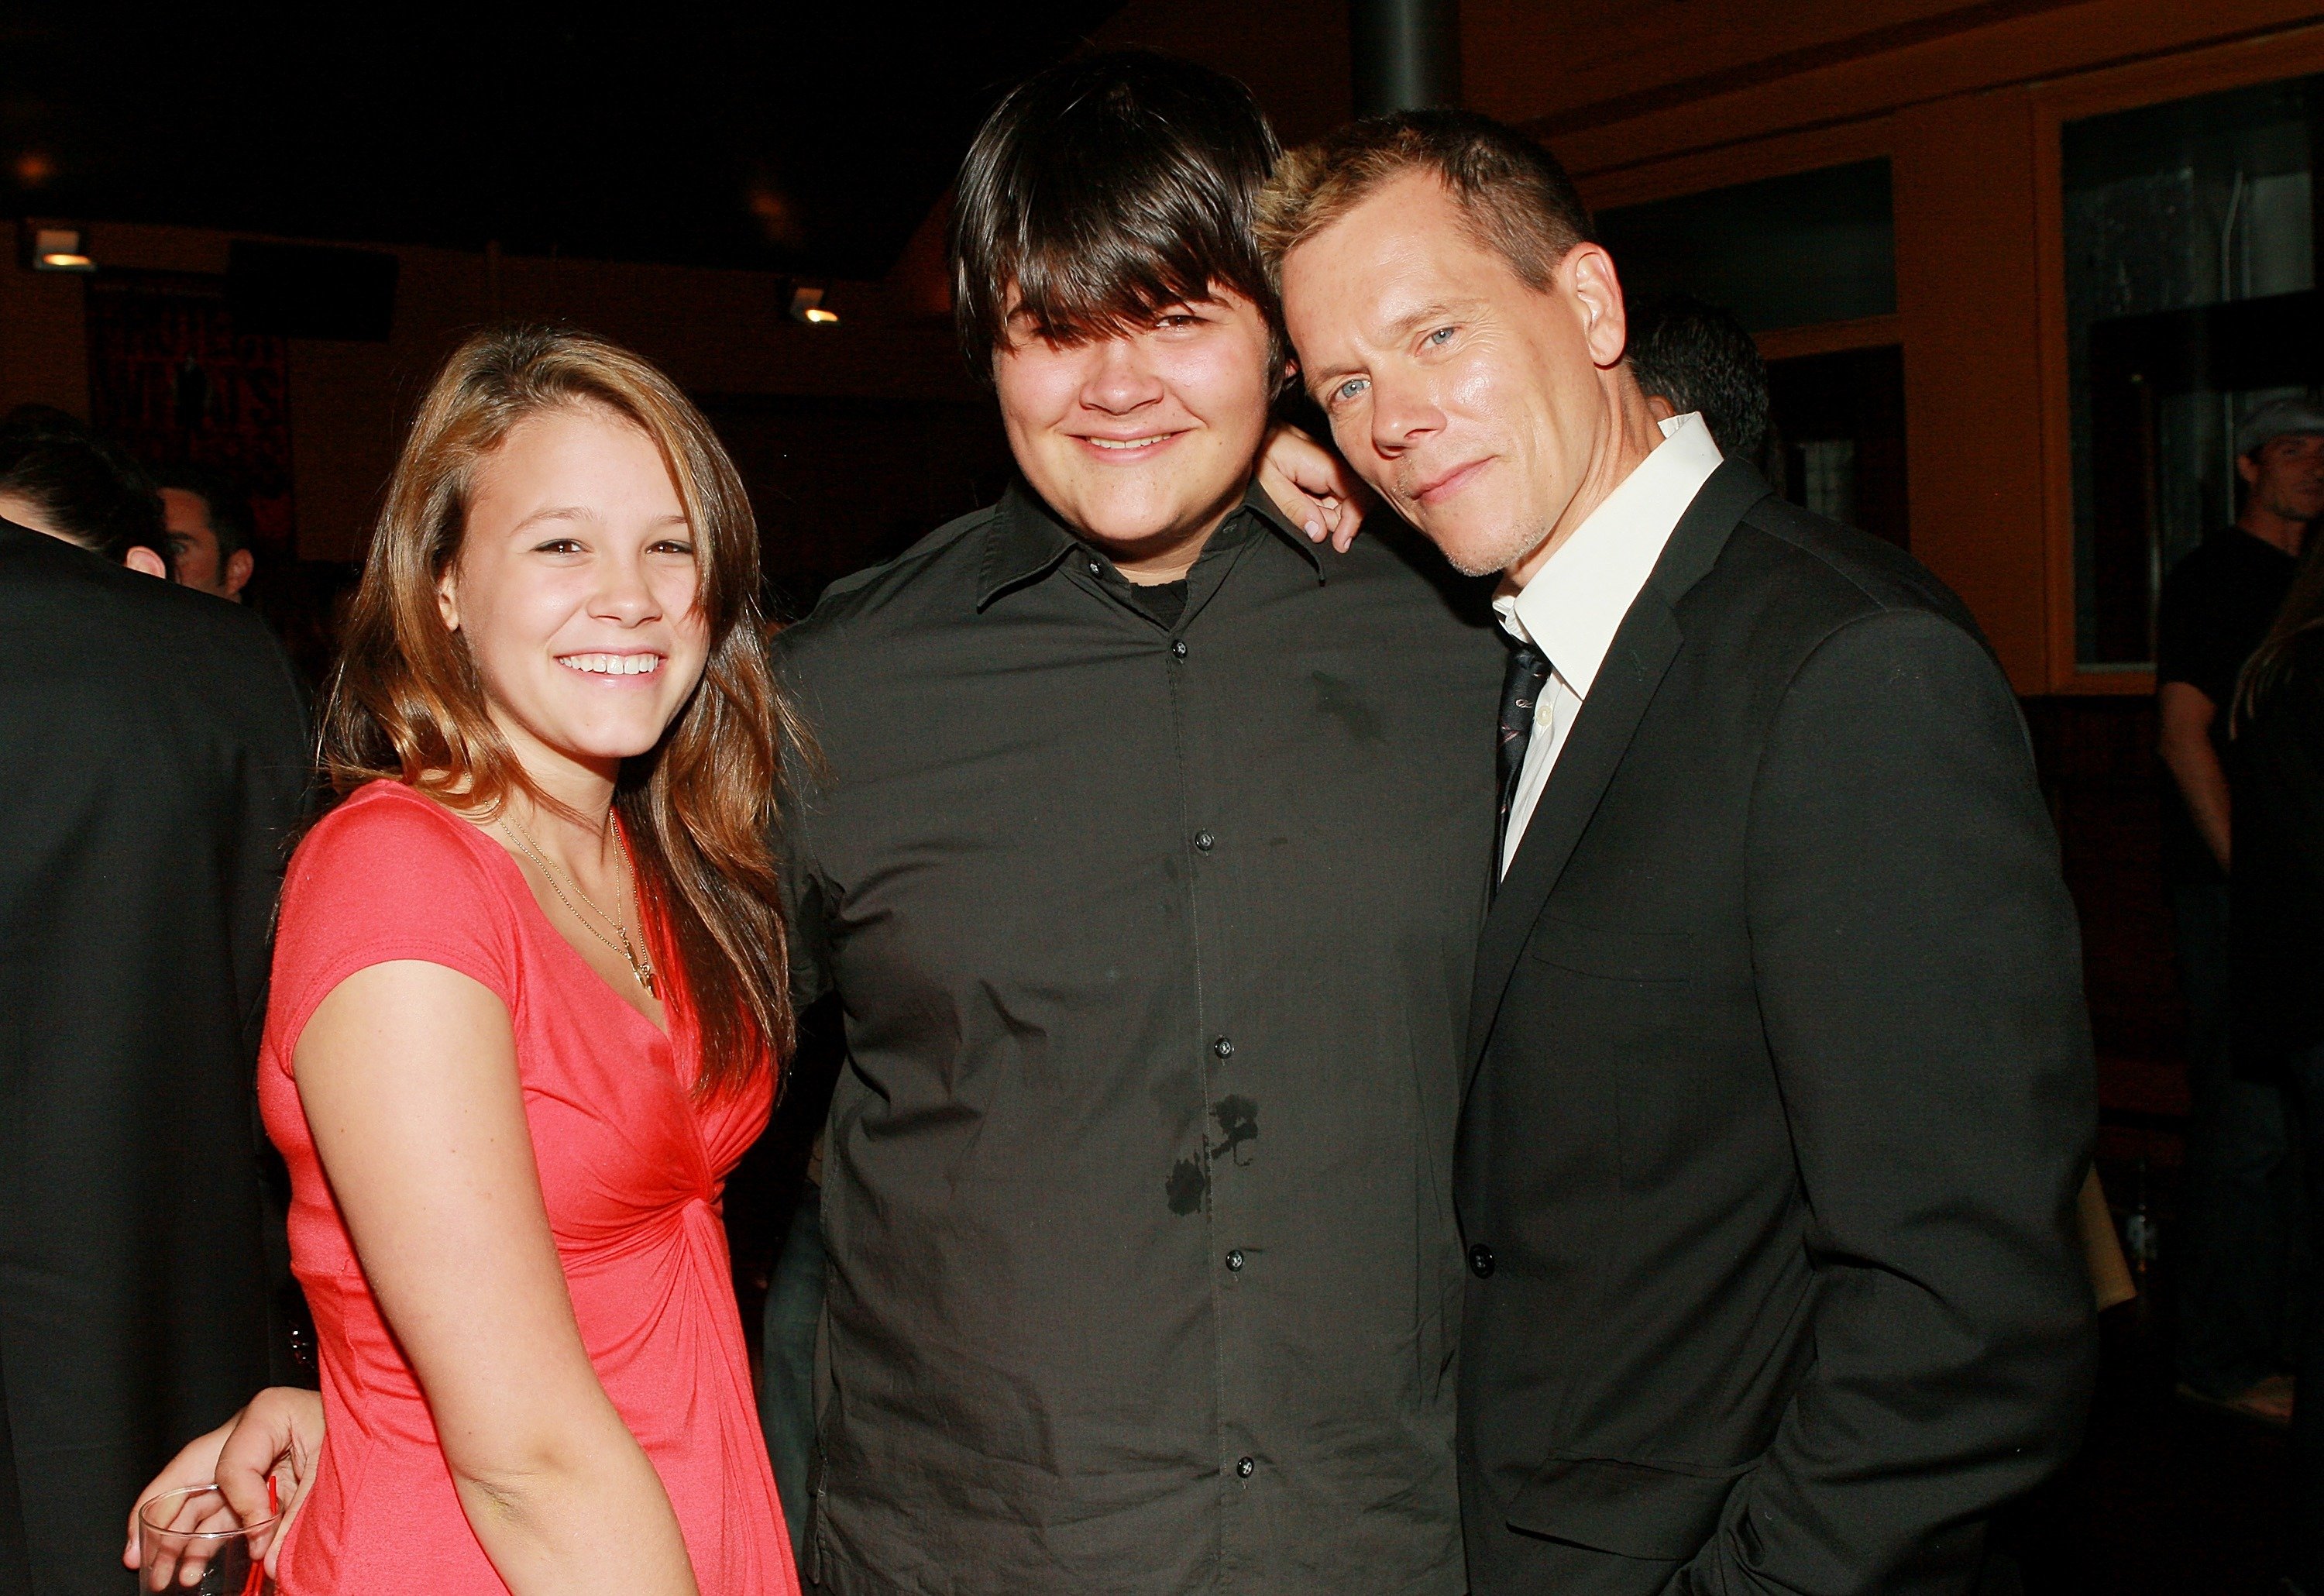 Sosie, Kevin, and Travis Bacon at the "Death Sentence" premiere after party on August 28, 2007, in New York City | Source: Getty Images